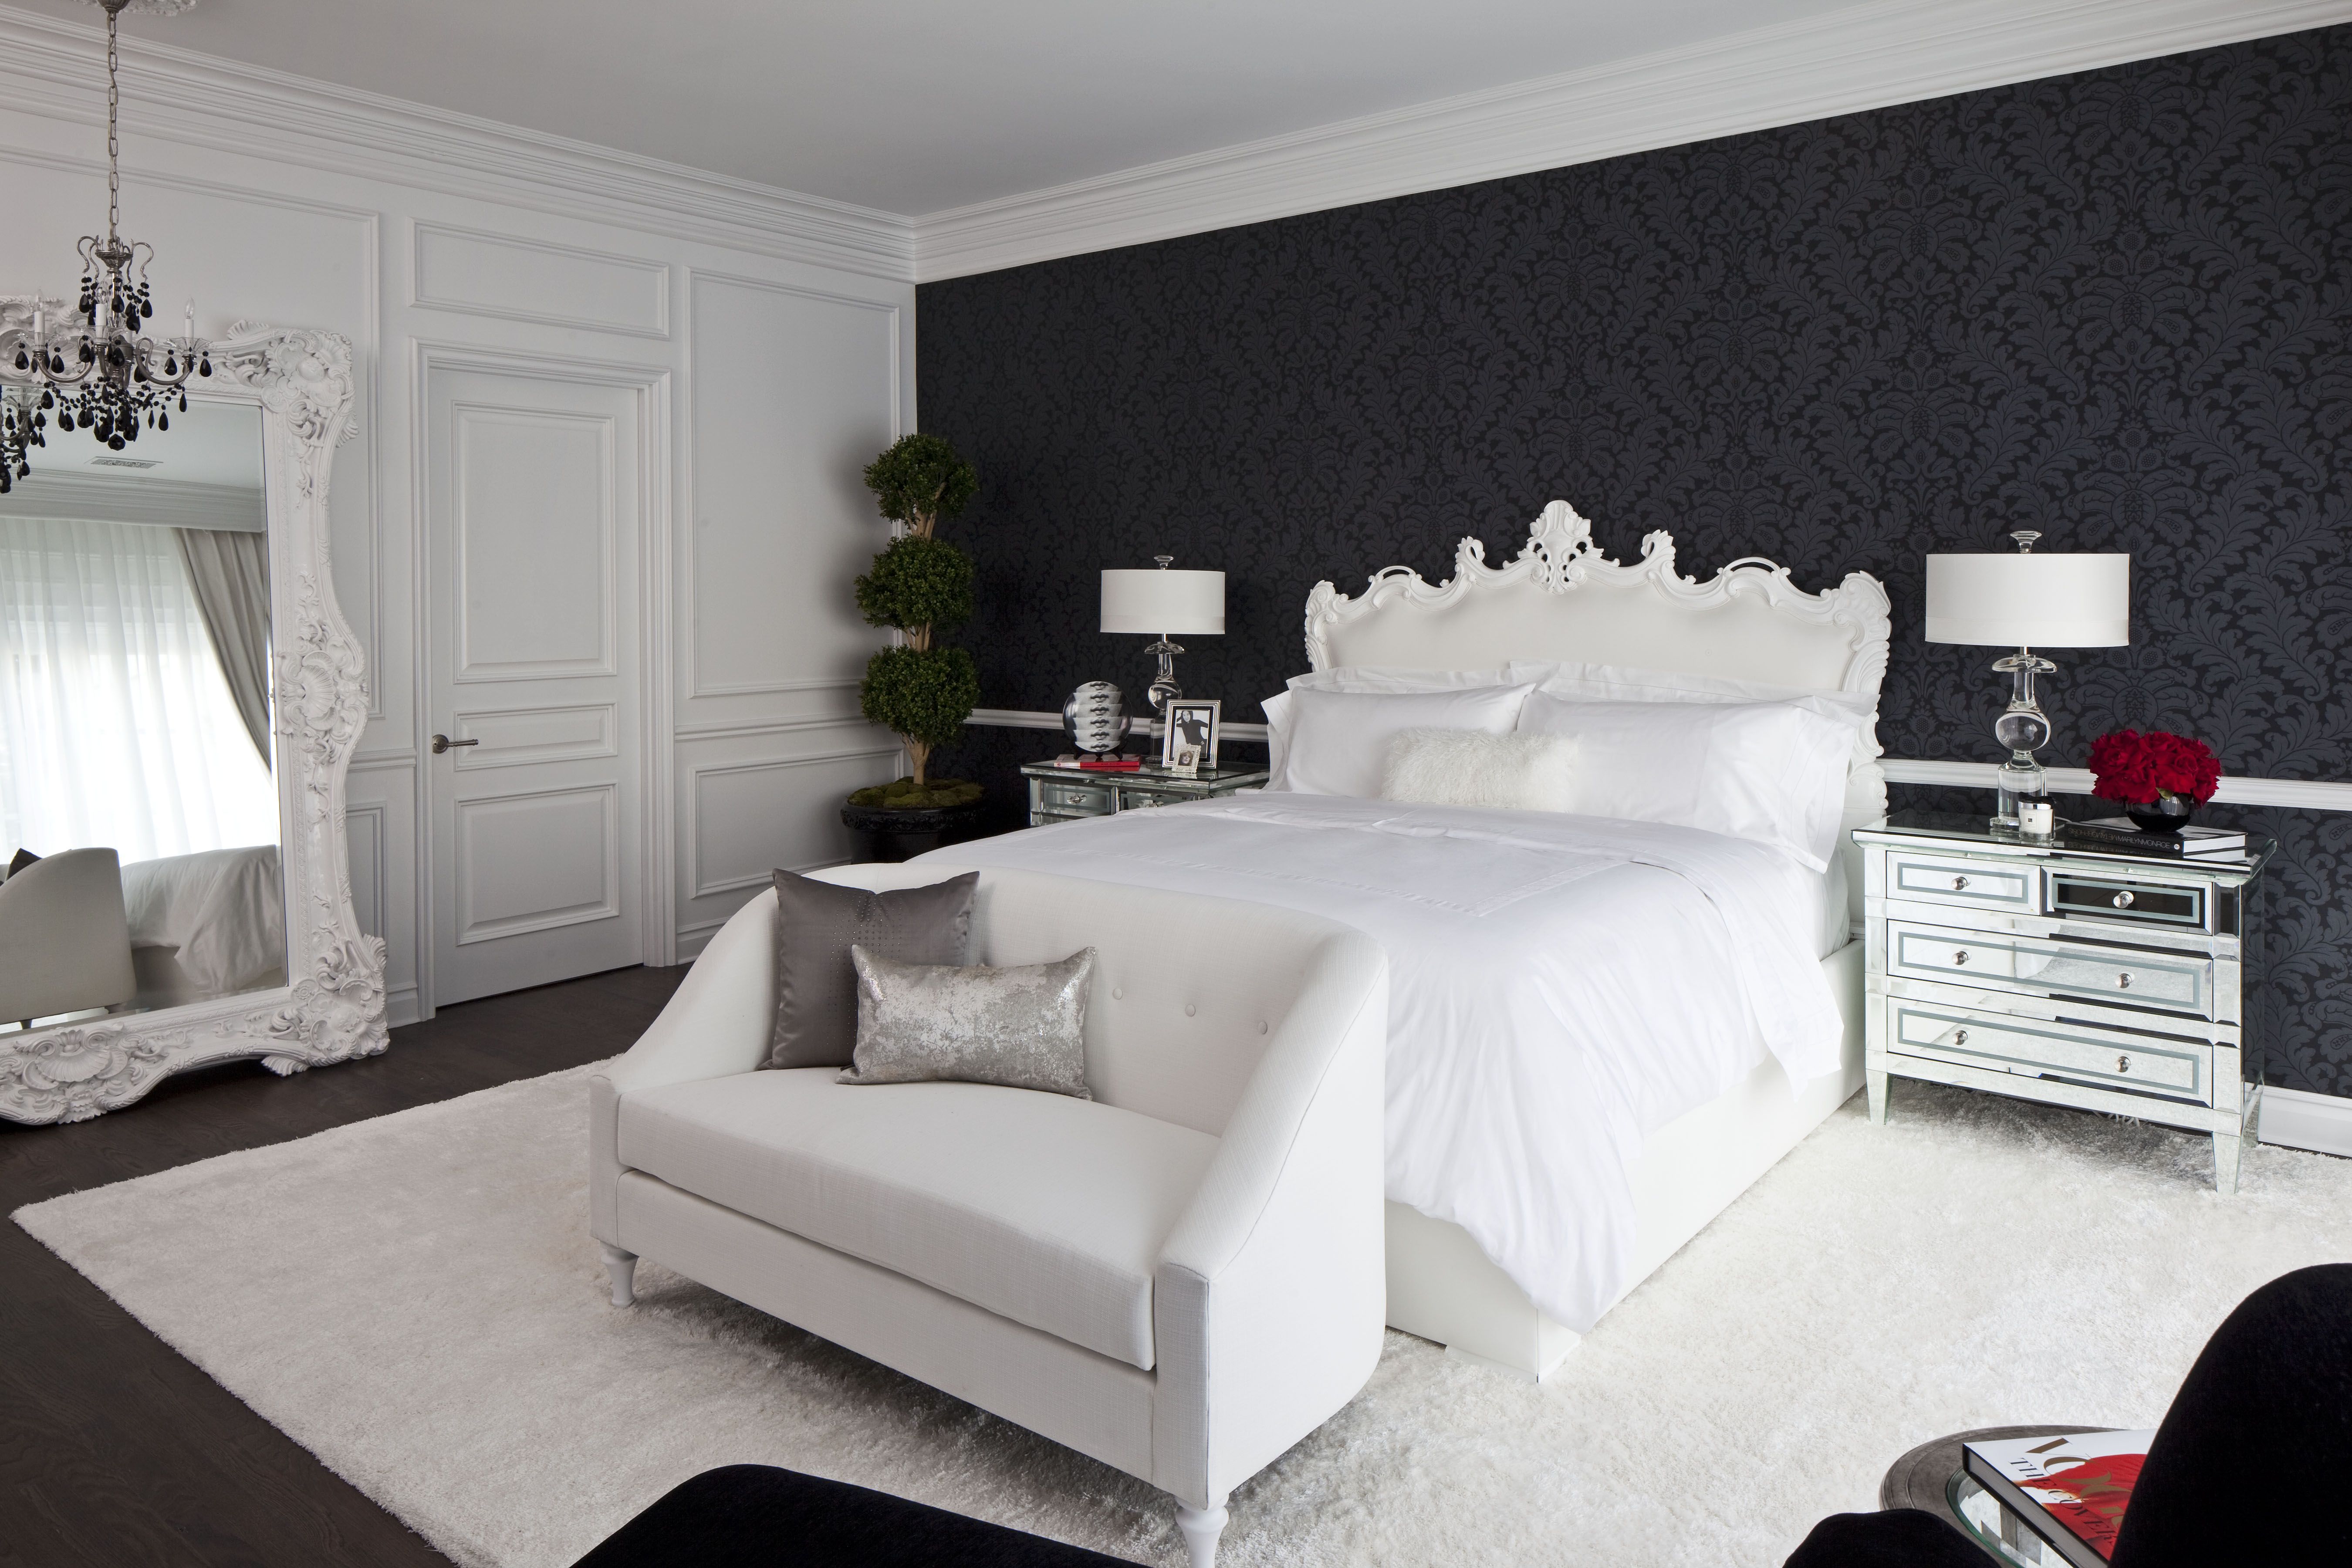 36 Black White Bedrooms Photos And, How To Decorate A Black And White Room